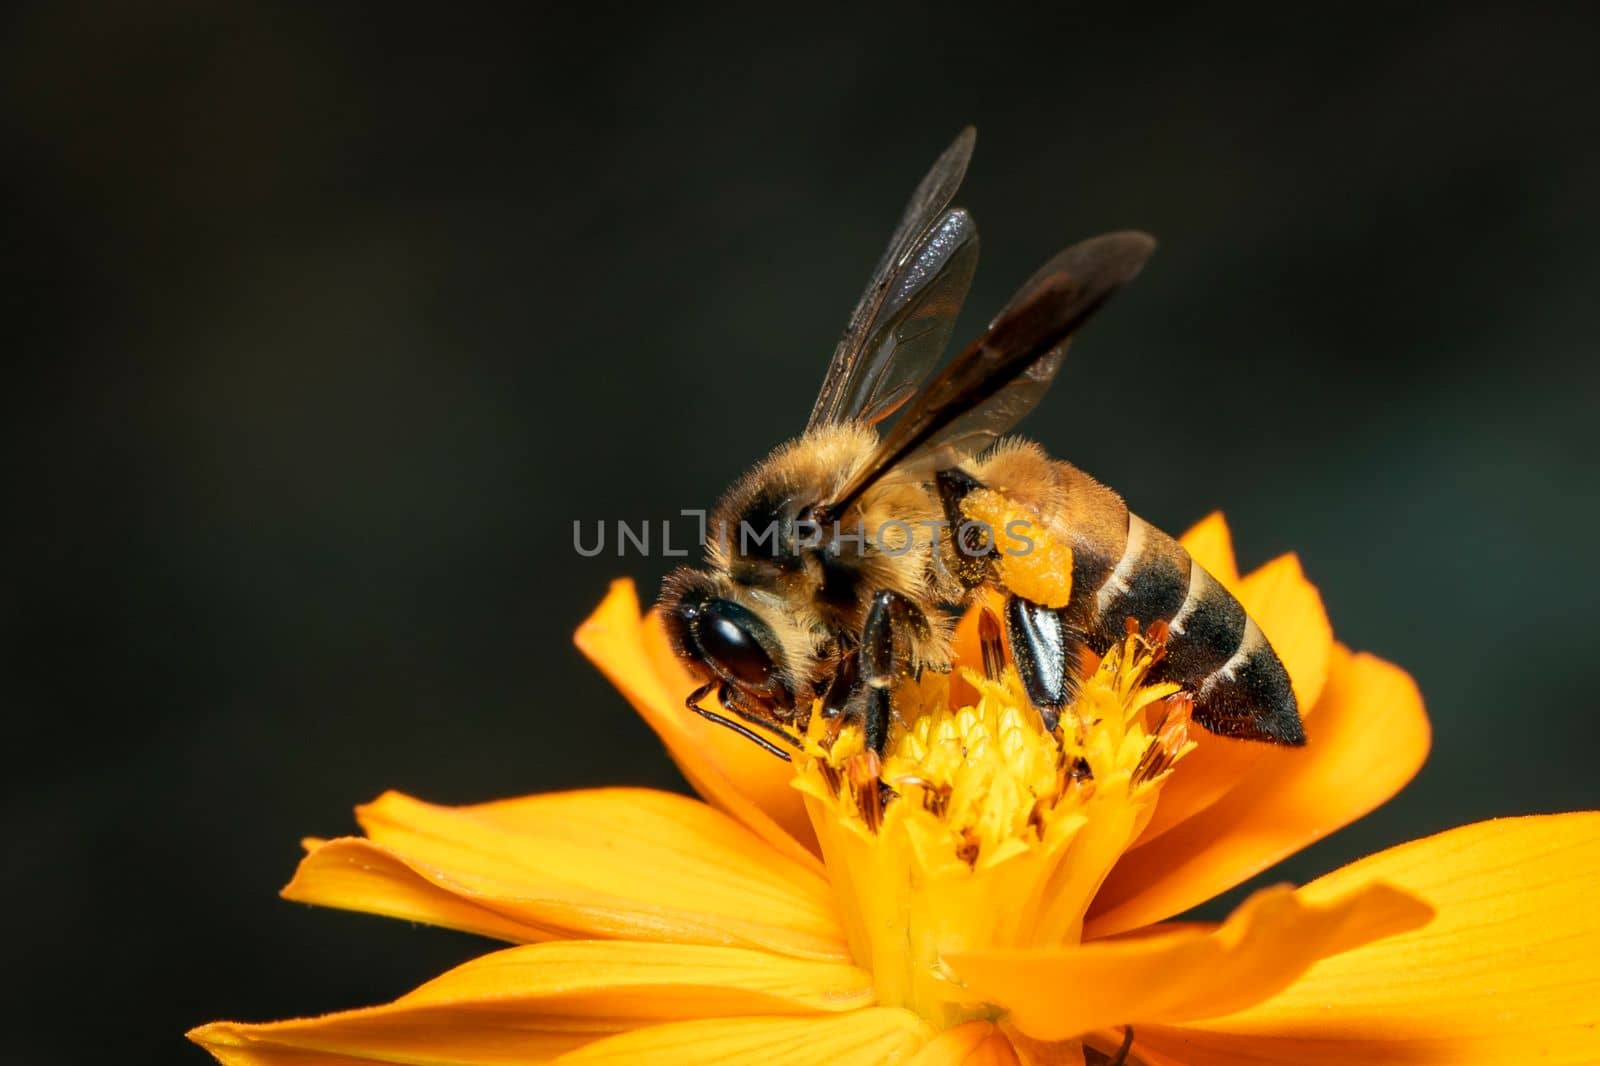 Image of giant honey bee(Apis dorsata) on yellow flower collects nectar on a natural background. Golden honeybee on flower pollen. Insect. Animal. by yod67